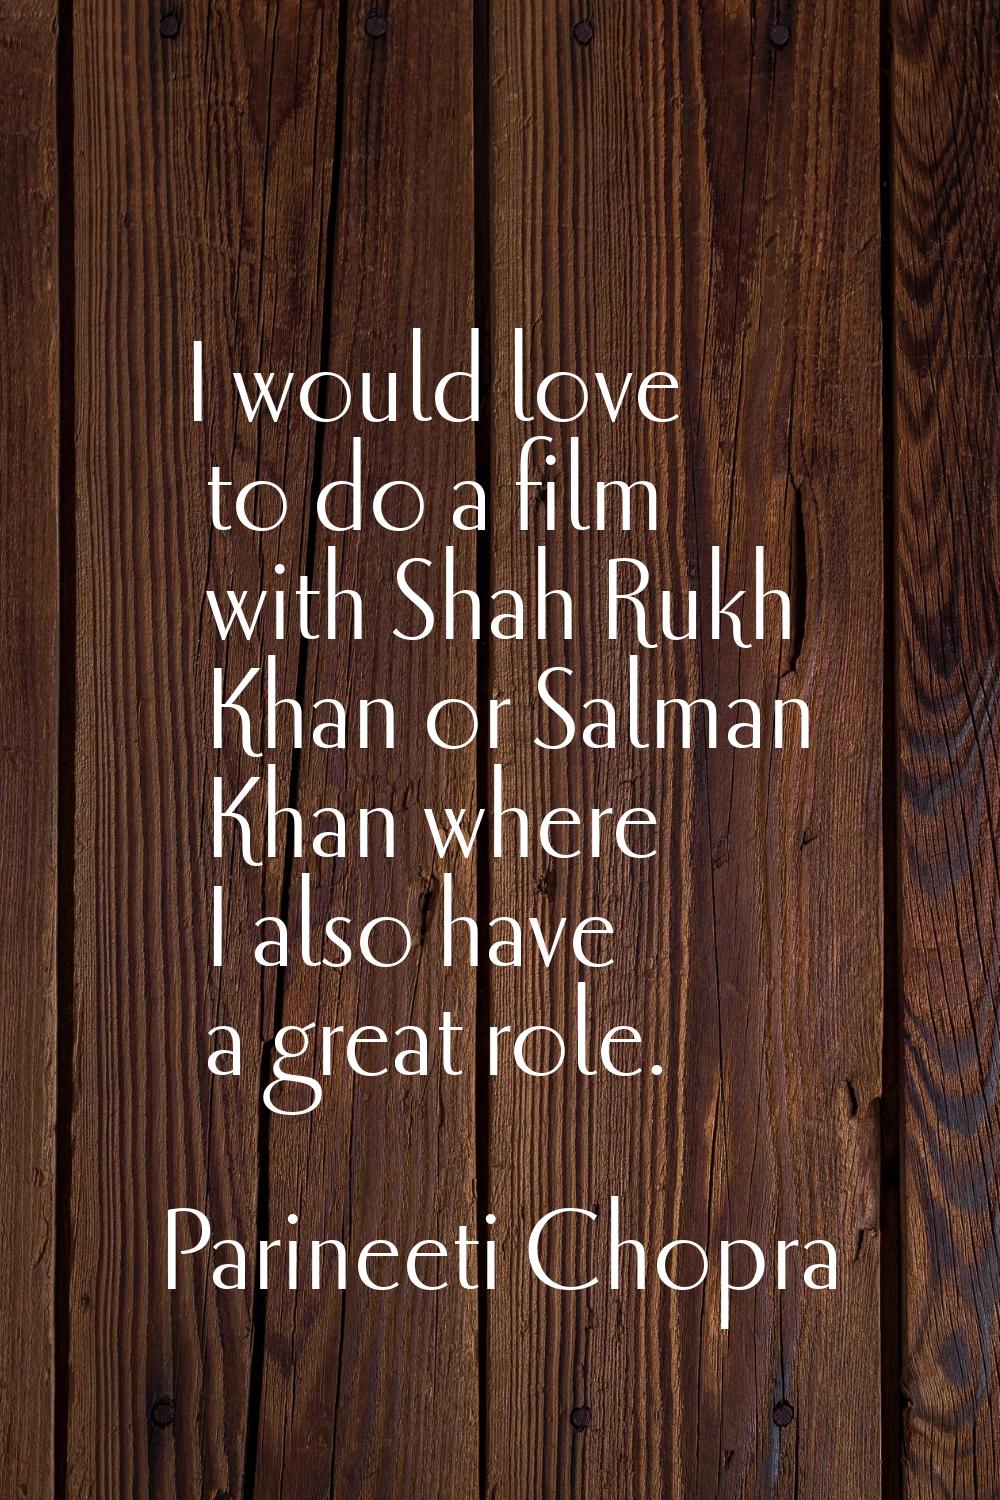 I would love to do a film with Shah Rukh Khan or Salman Khan where I also have a great role.